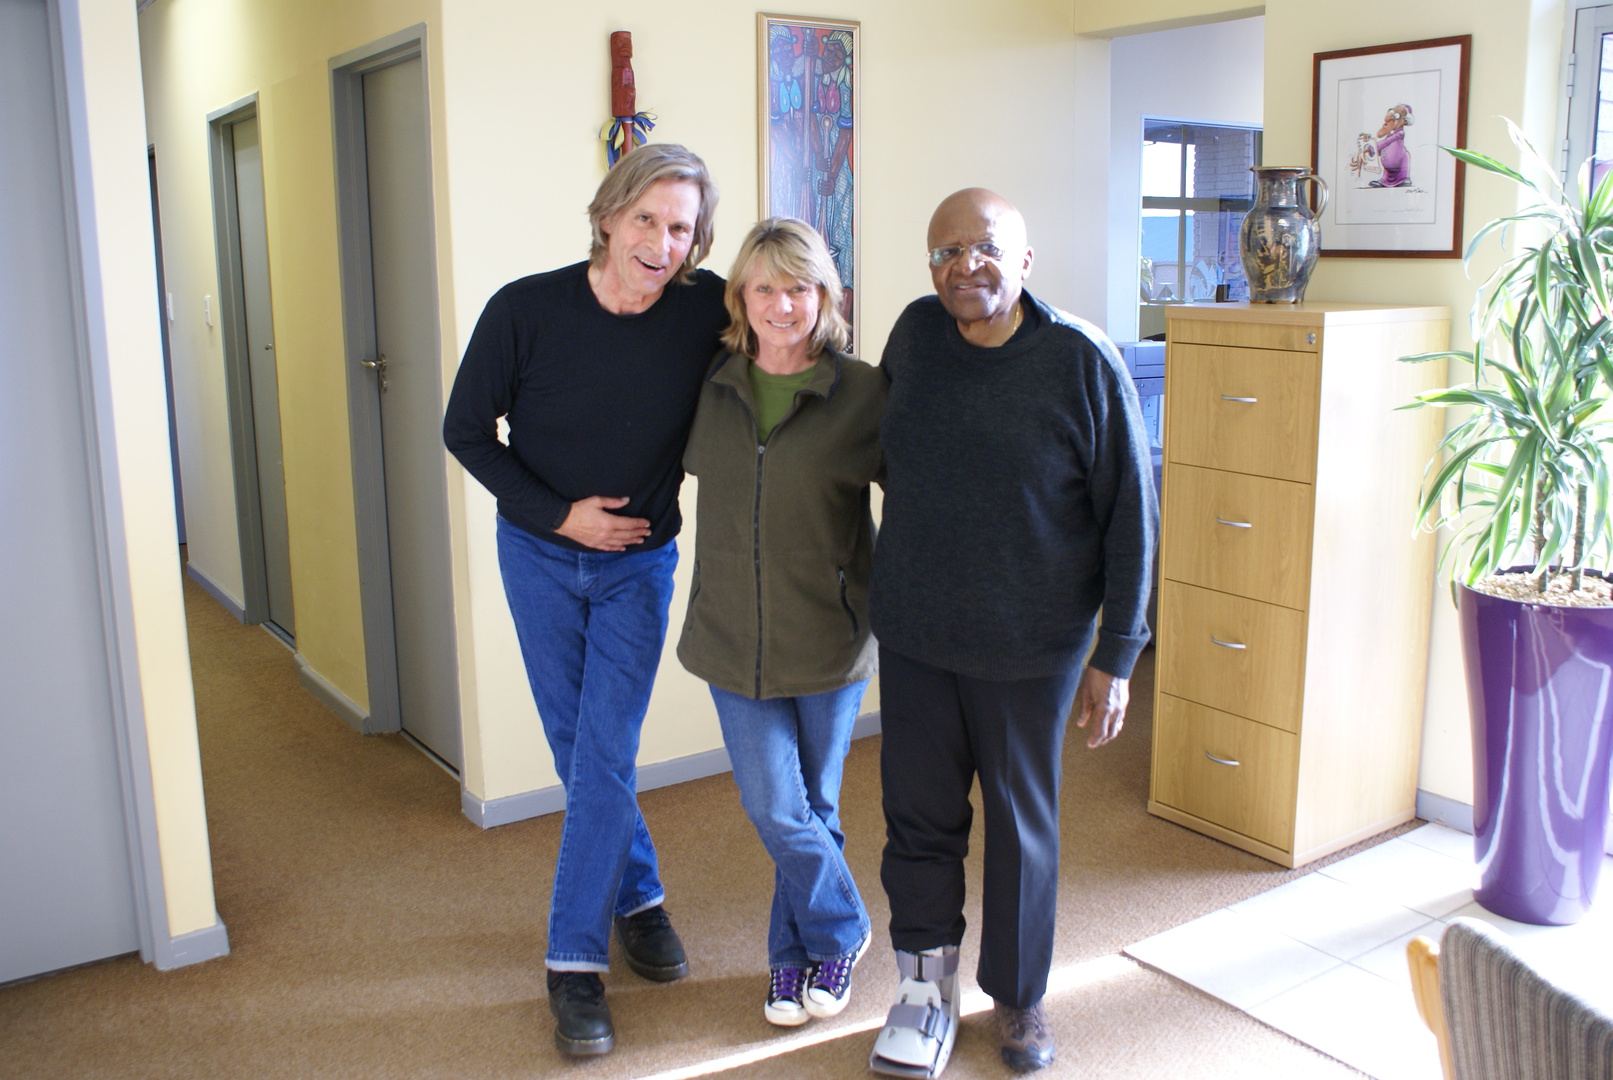 Shooting in South Africa with Desmond Tutu for Children of the Light